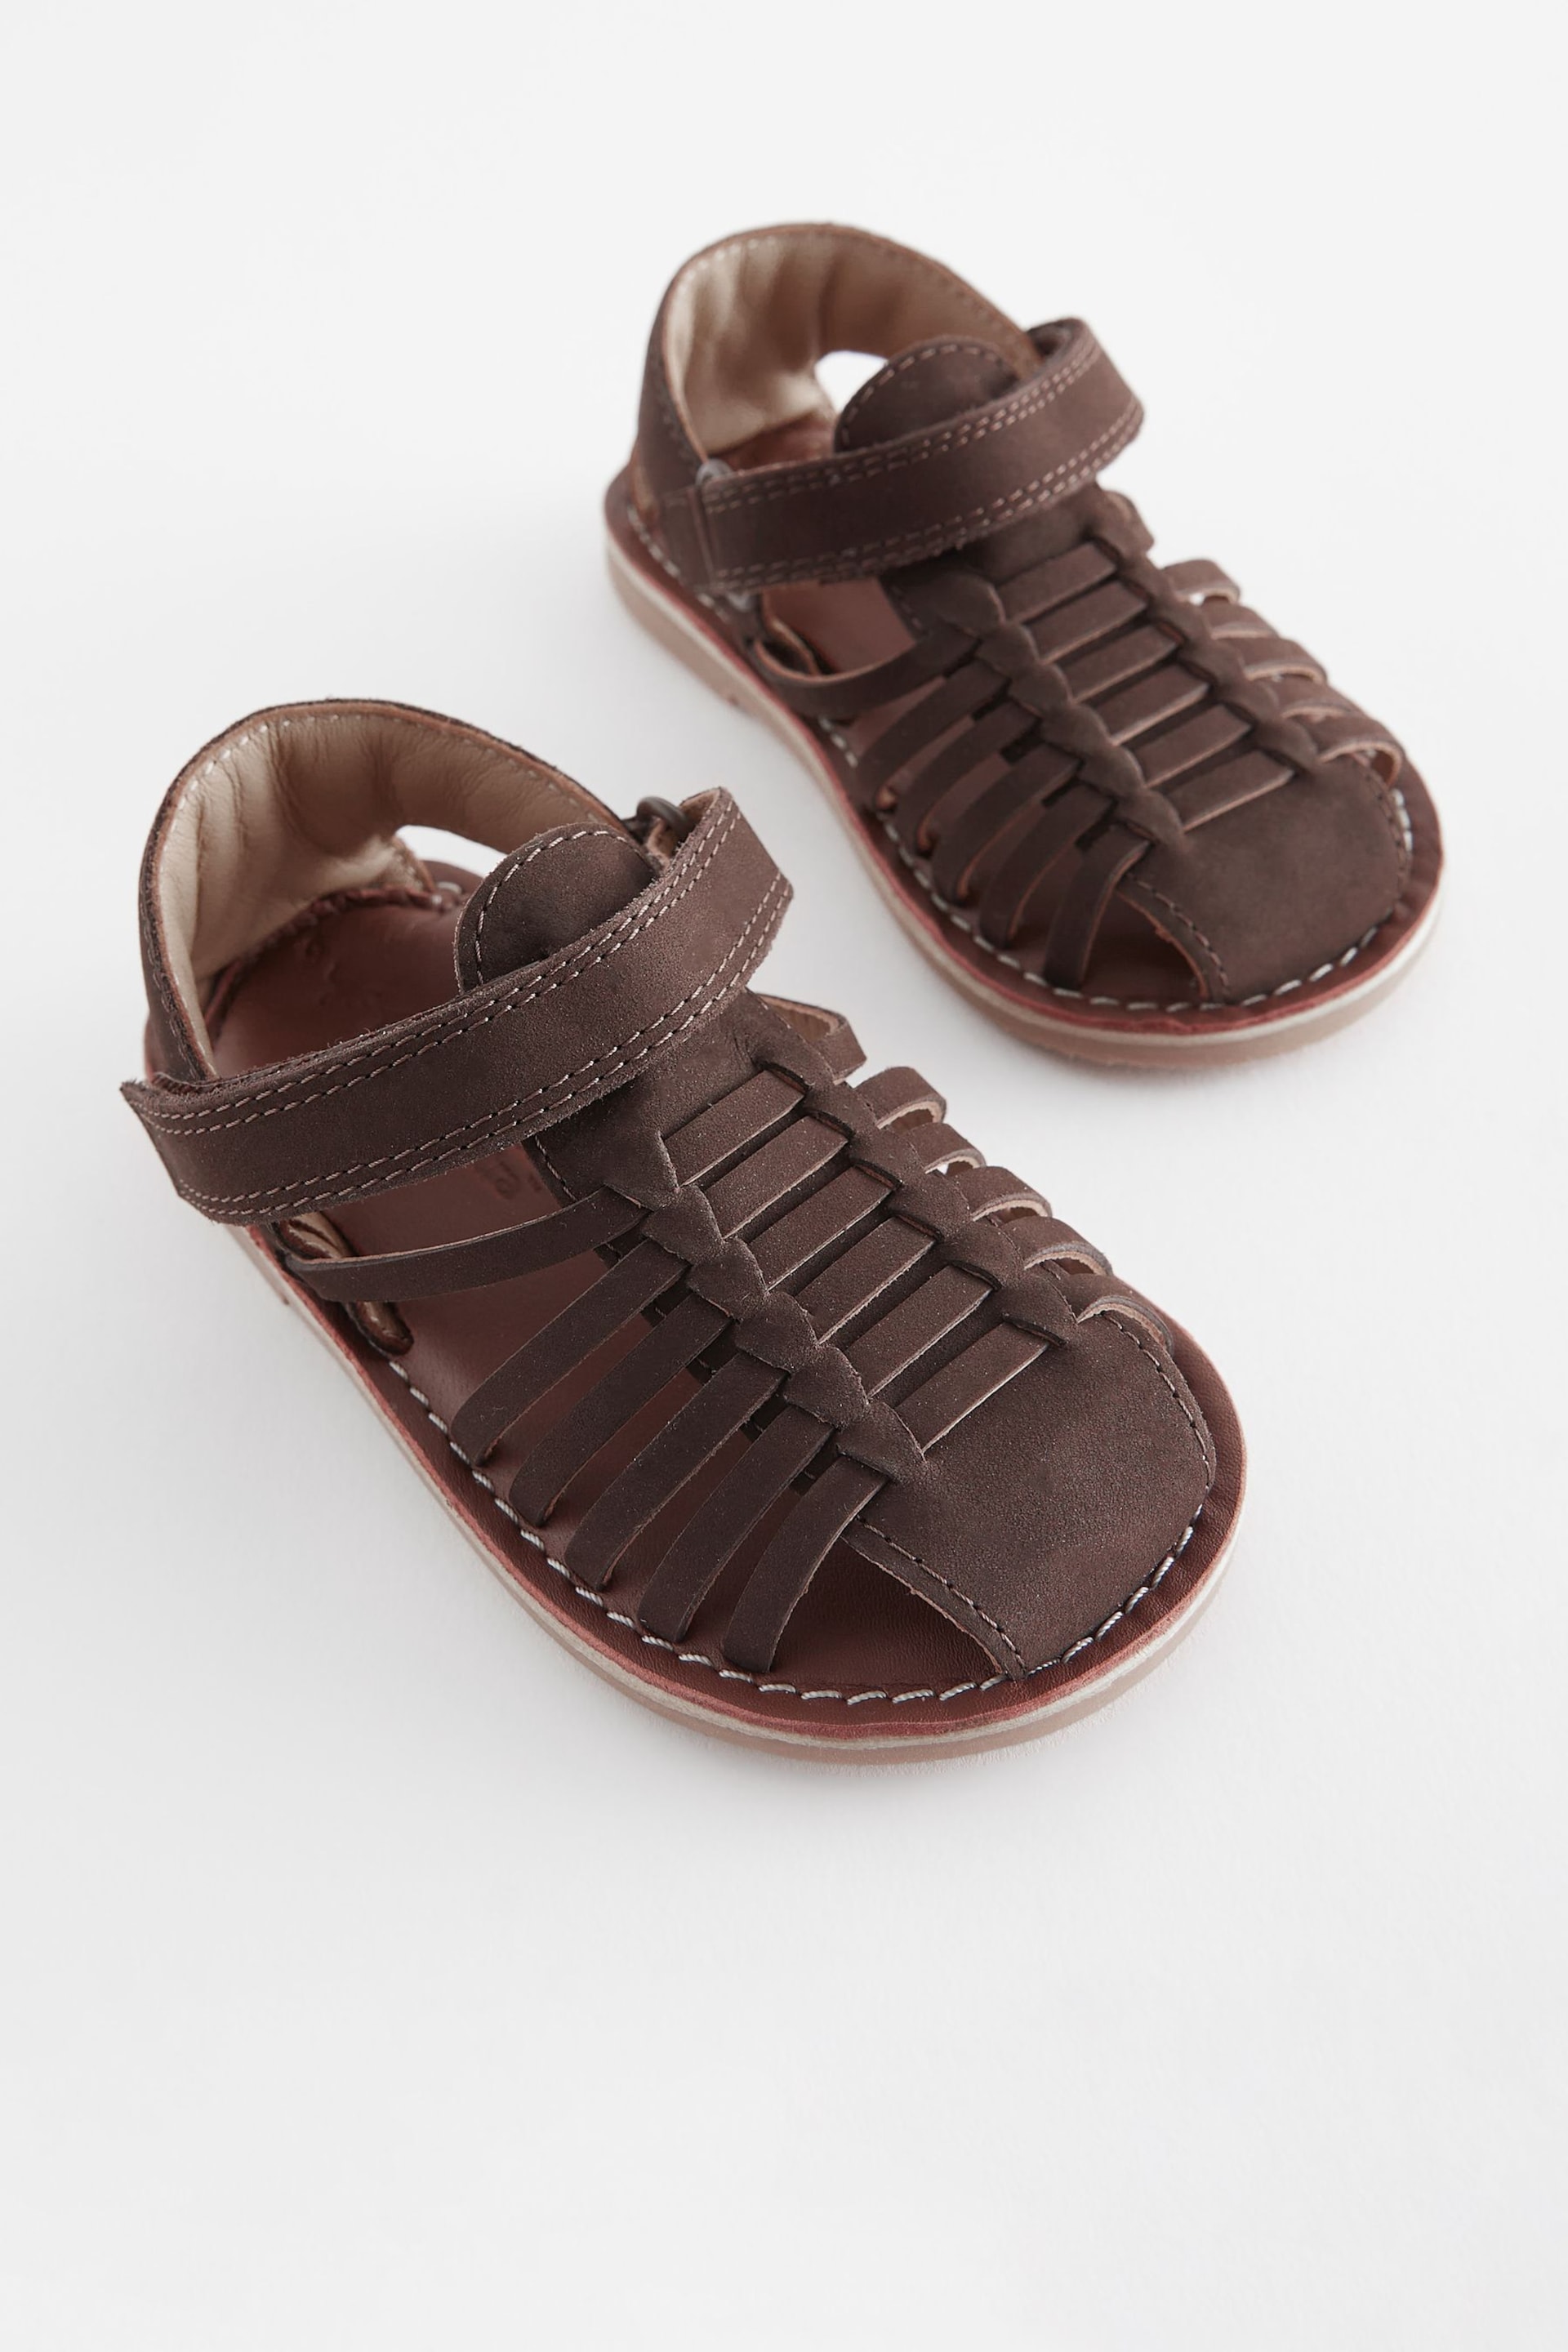 Chocolate Brown Leather Closed Toe Sandals - Image 1 of 5